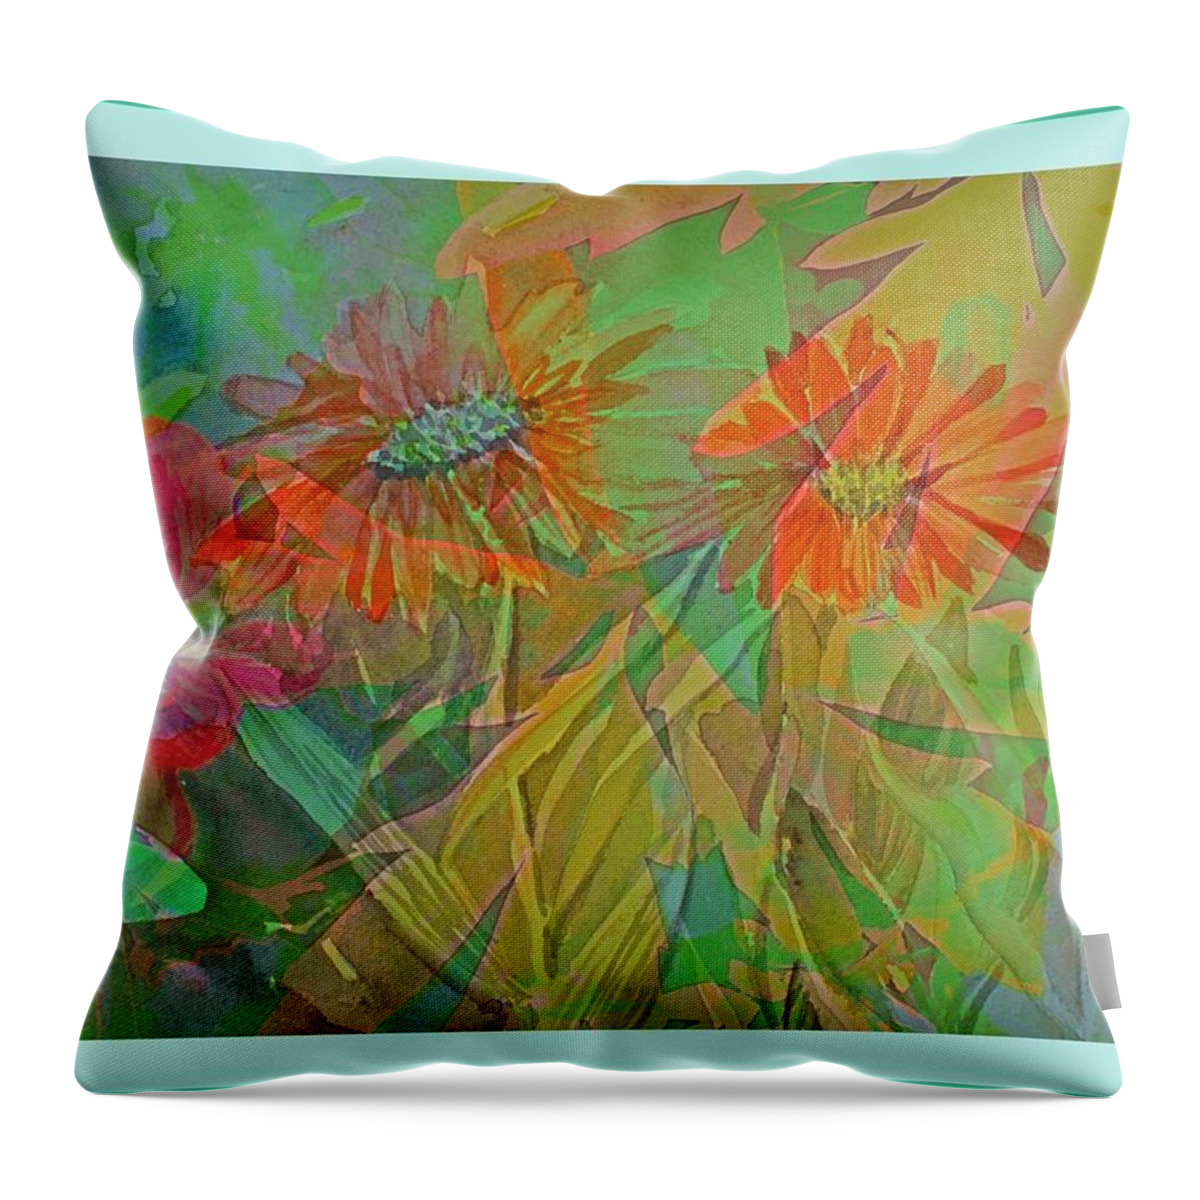 Garden Throw Pillow featuring the mixed media Spring Forward by Mindy Newman